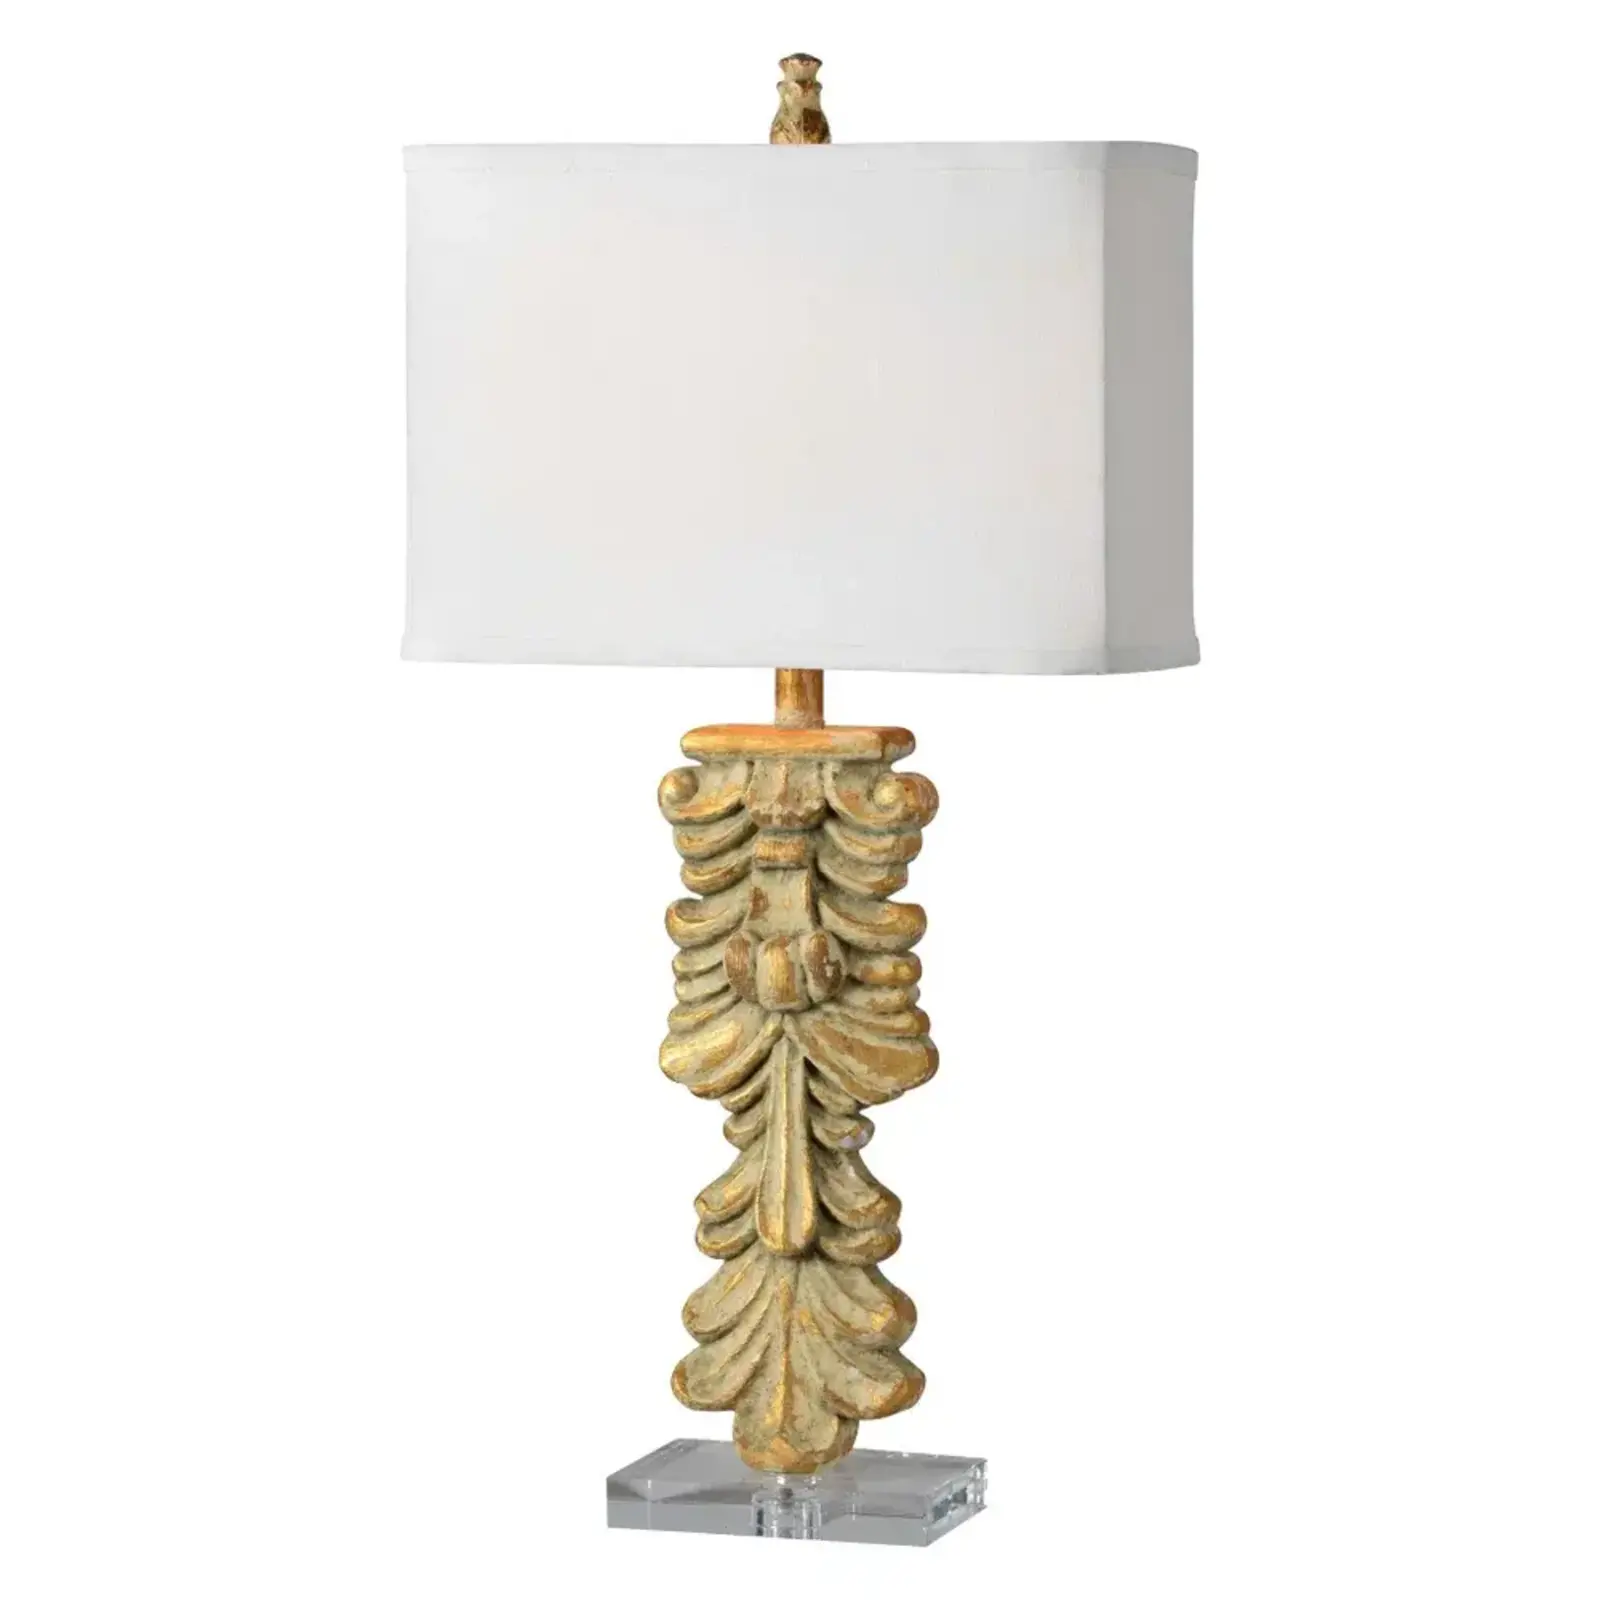 Forty West Vaughn Table Lamp   71083 loading=